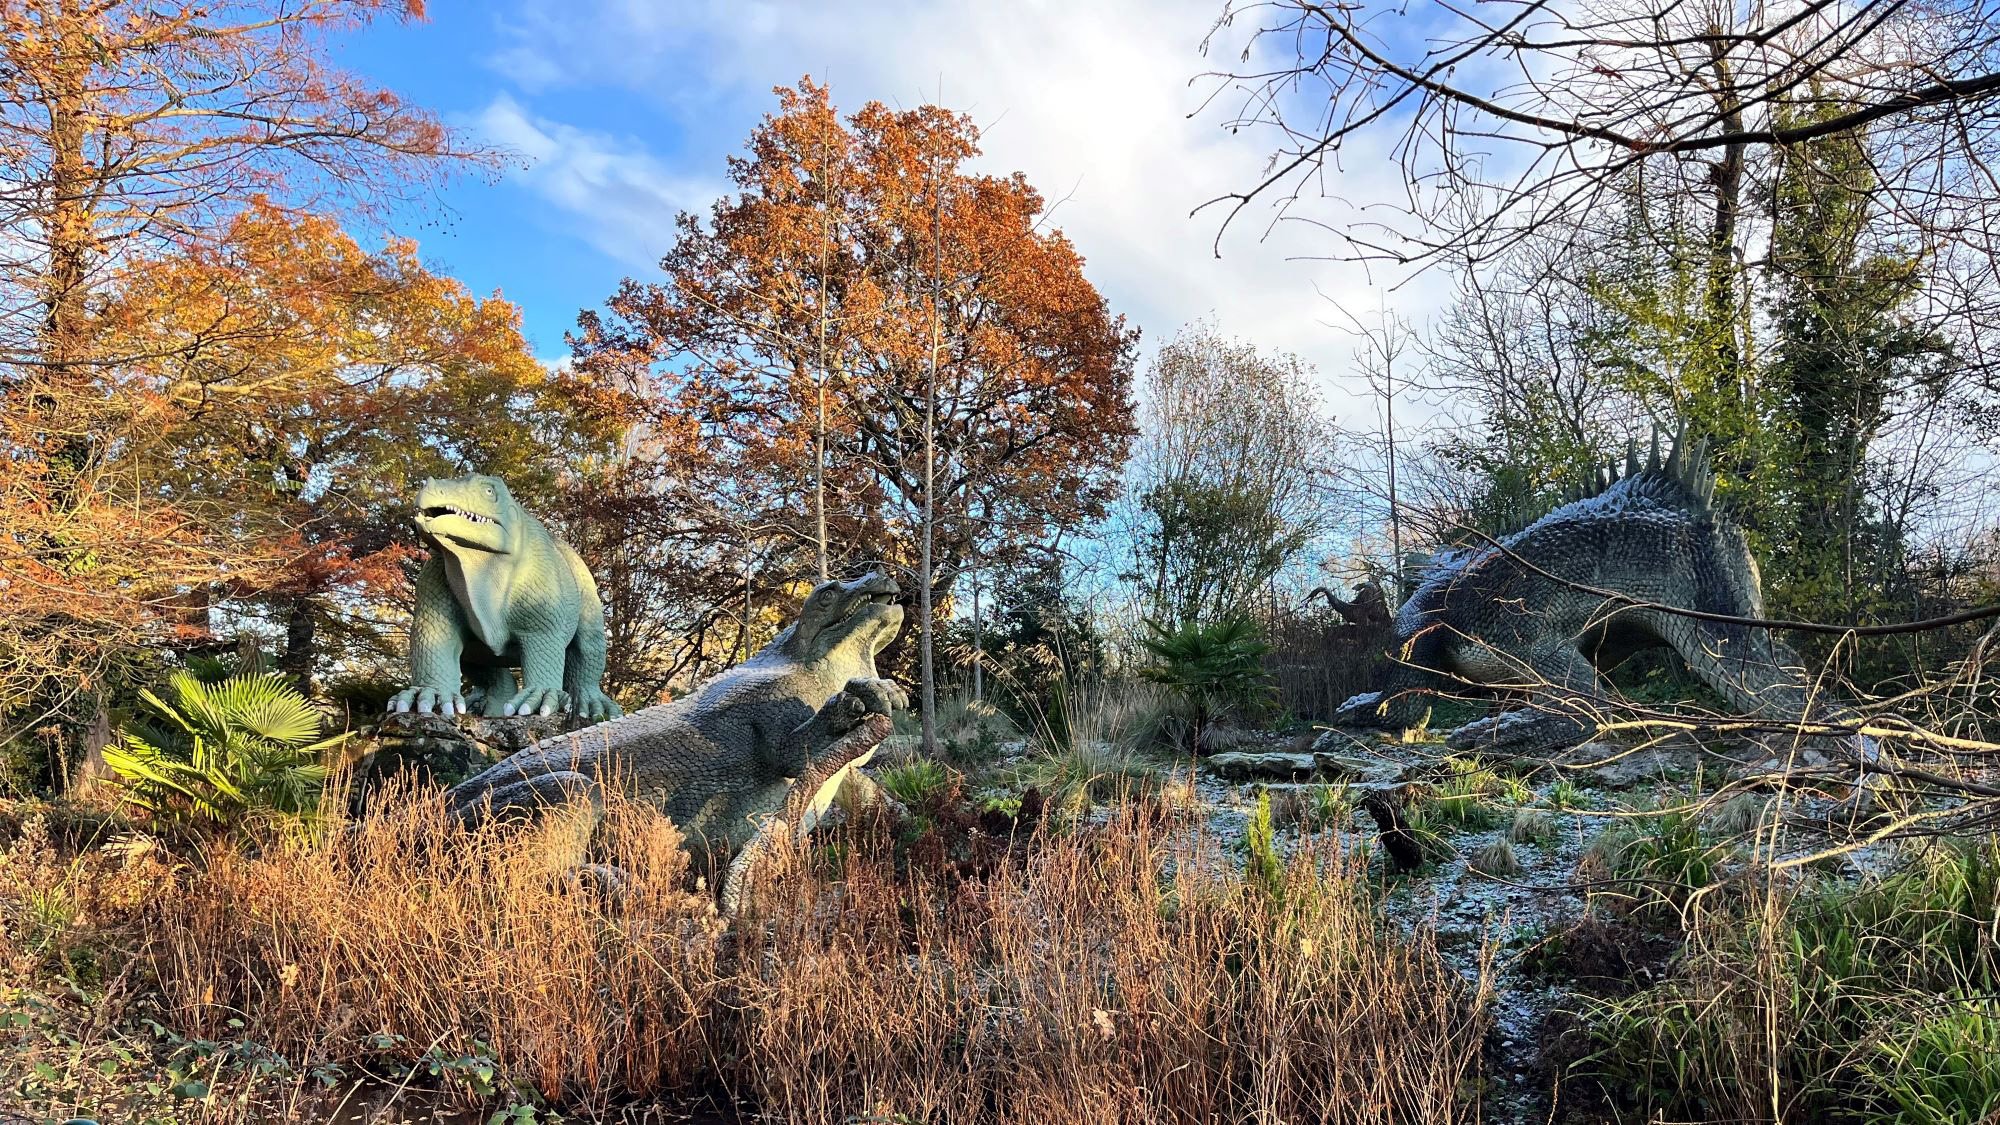 Photograph of three large Dinosaur sculptures in a wintry landscape.